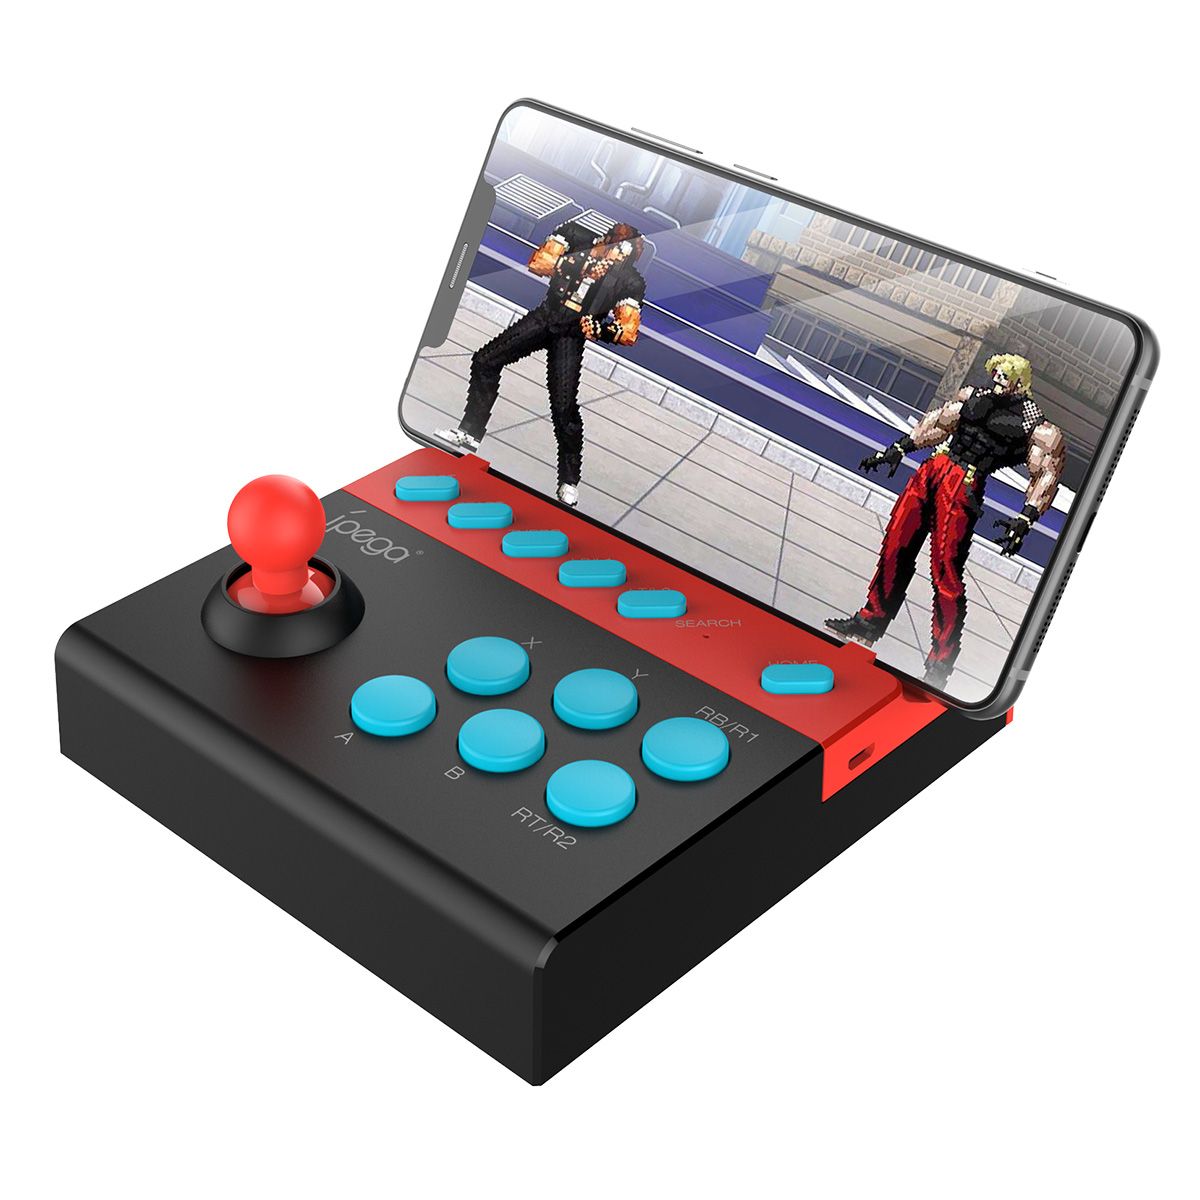 iPega-PG-9135-bluetooth-Turbo-Gamepad-Game-Controller-Fight-Stick-for-iOS-Android-Mobile-Phone-Table-1524886